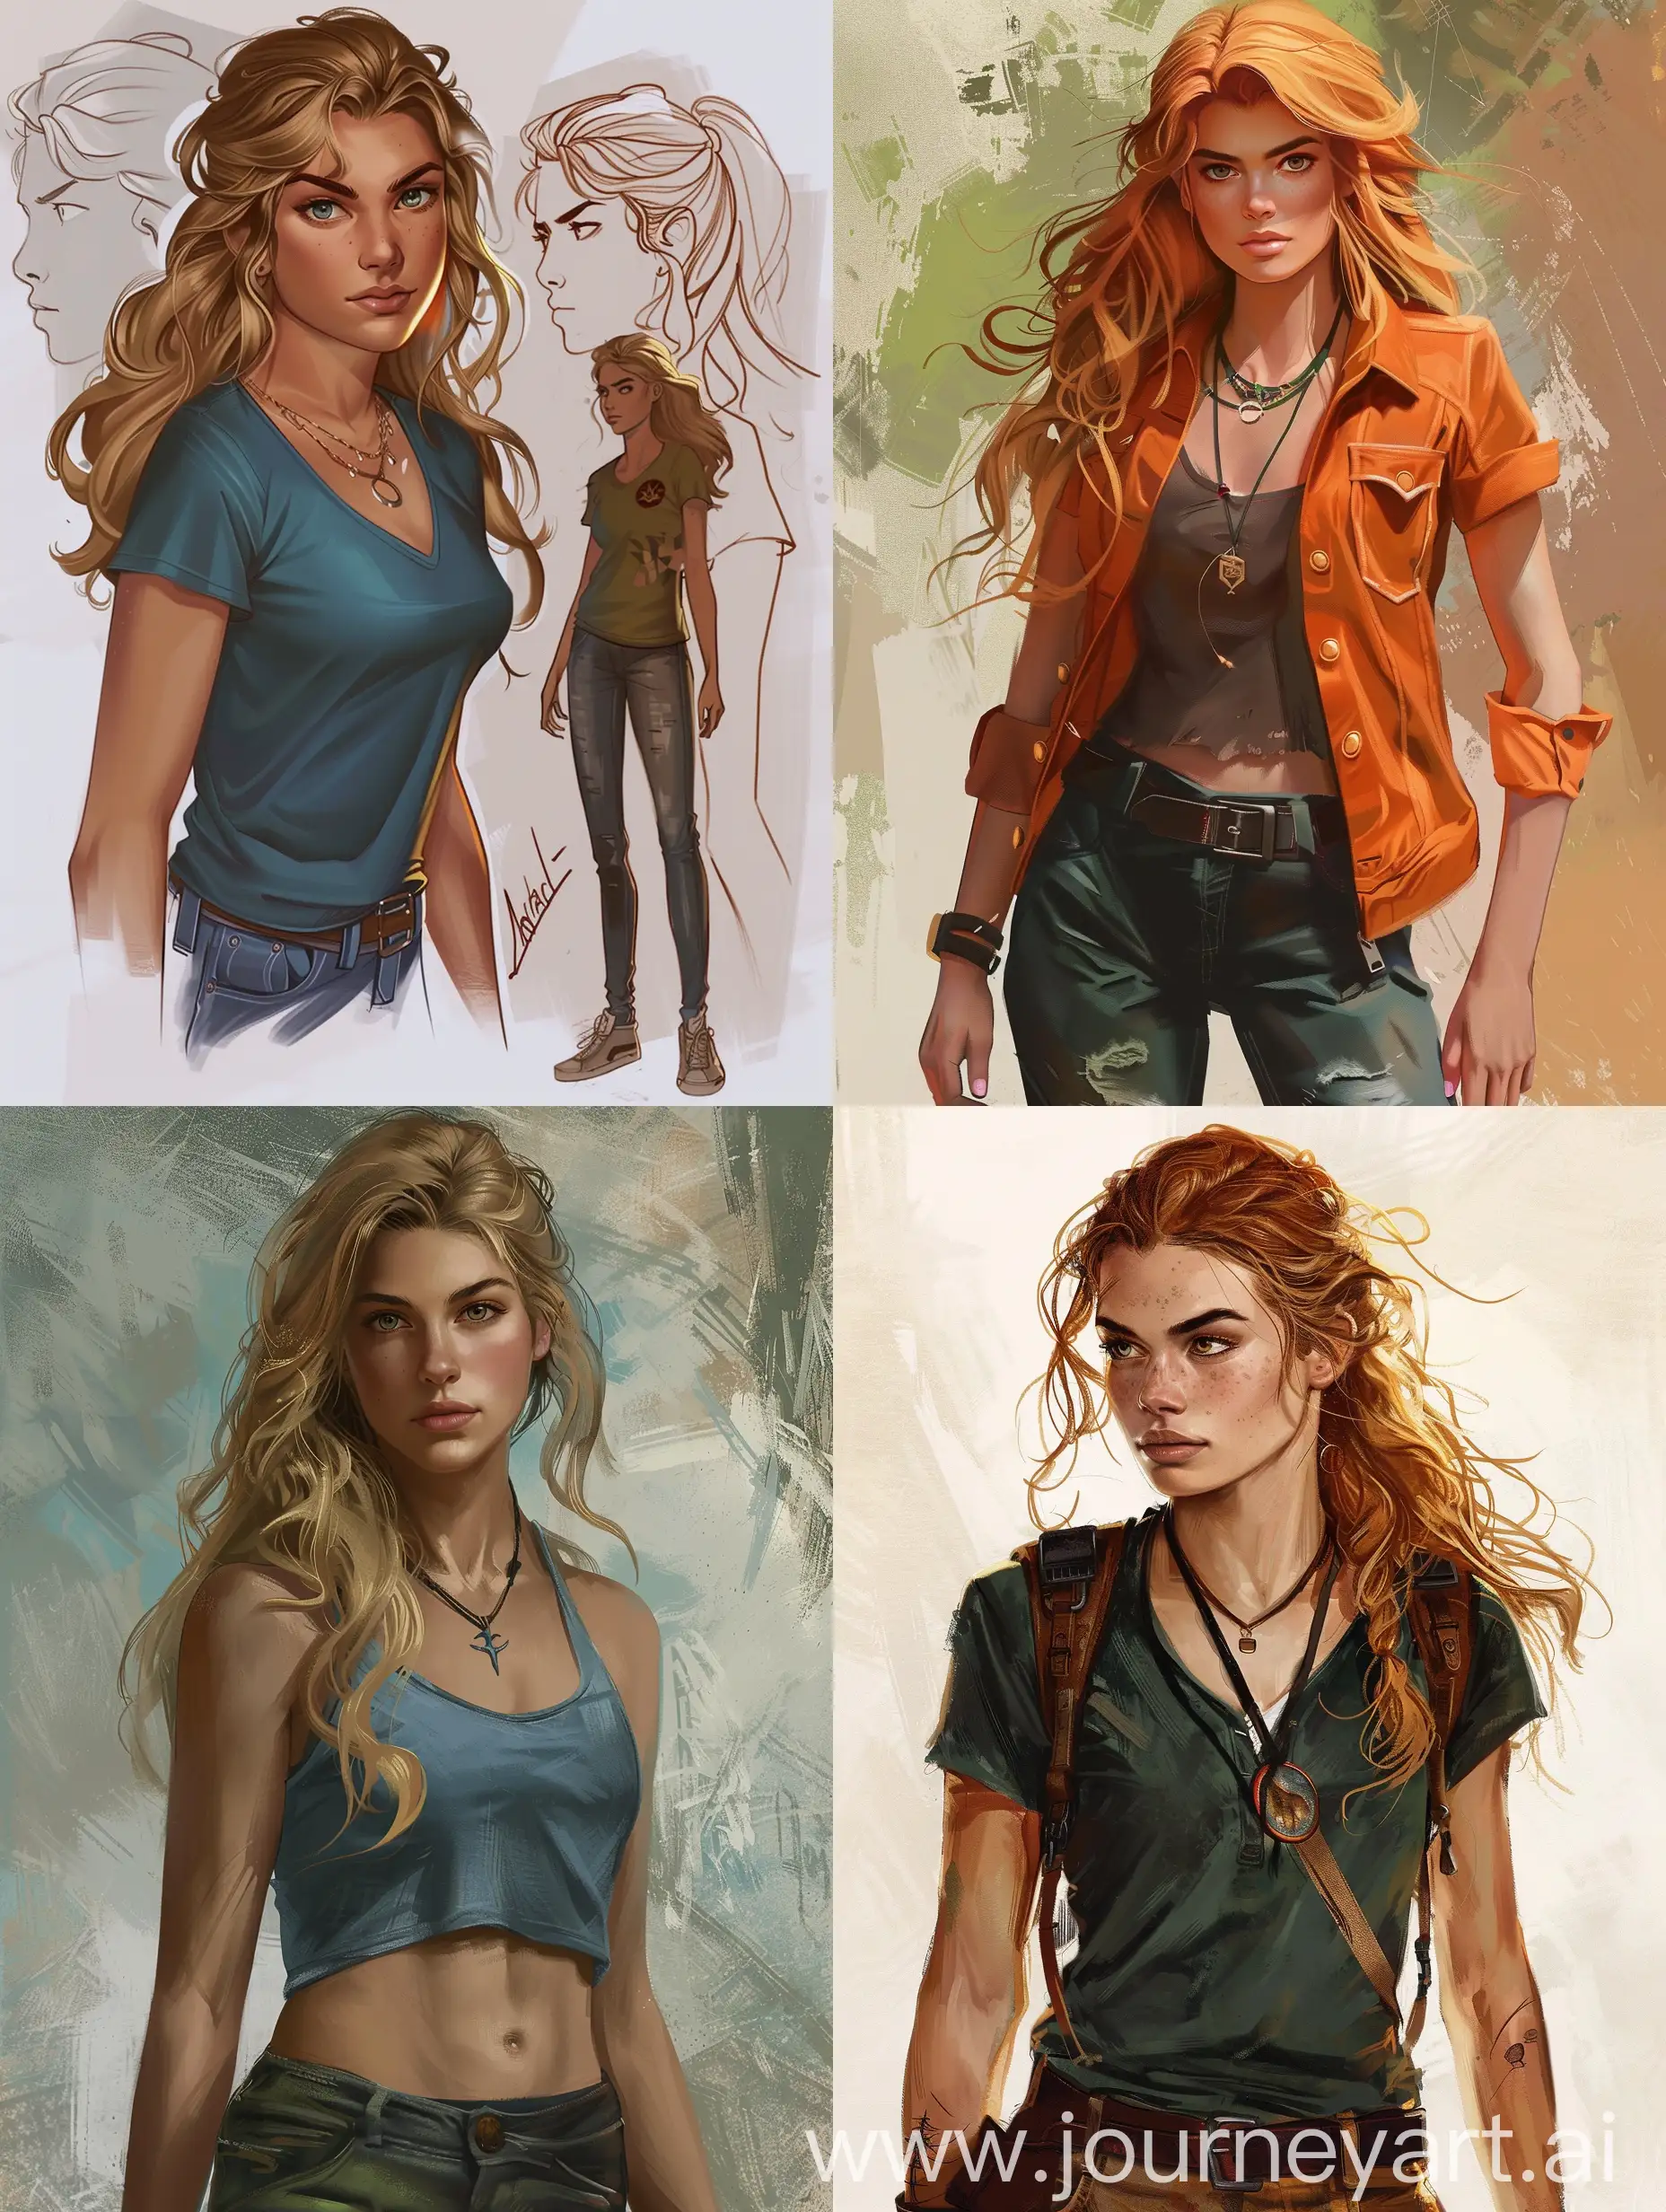 Hyperrealistic-Portrait-of-Annabeth-Chase-from-Rick-Riordans-Universe